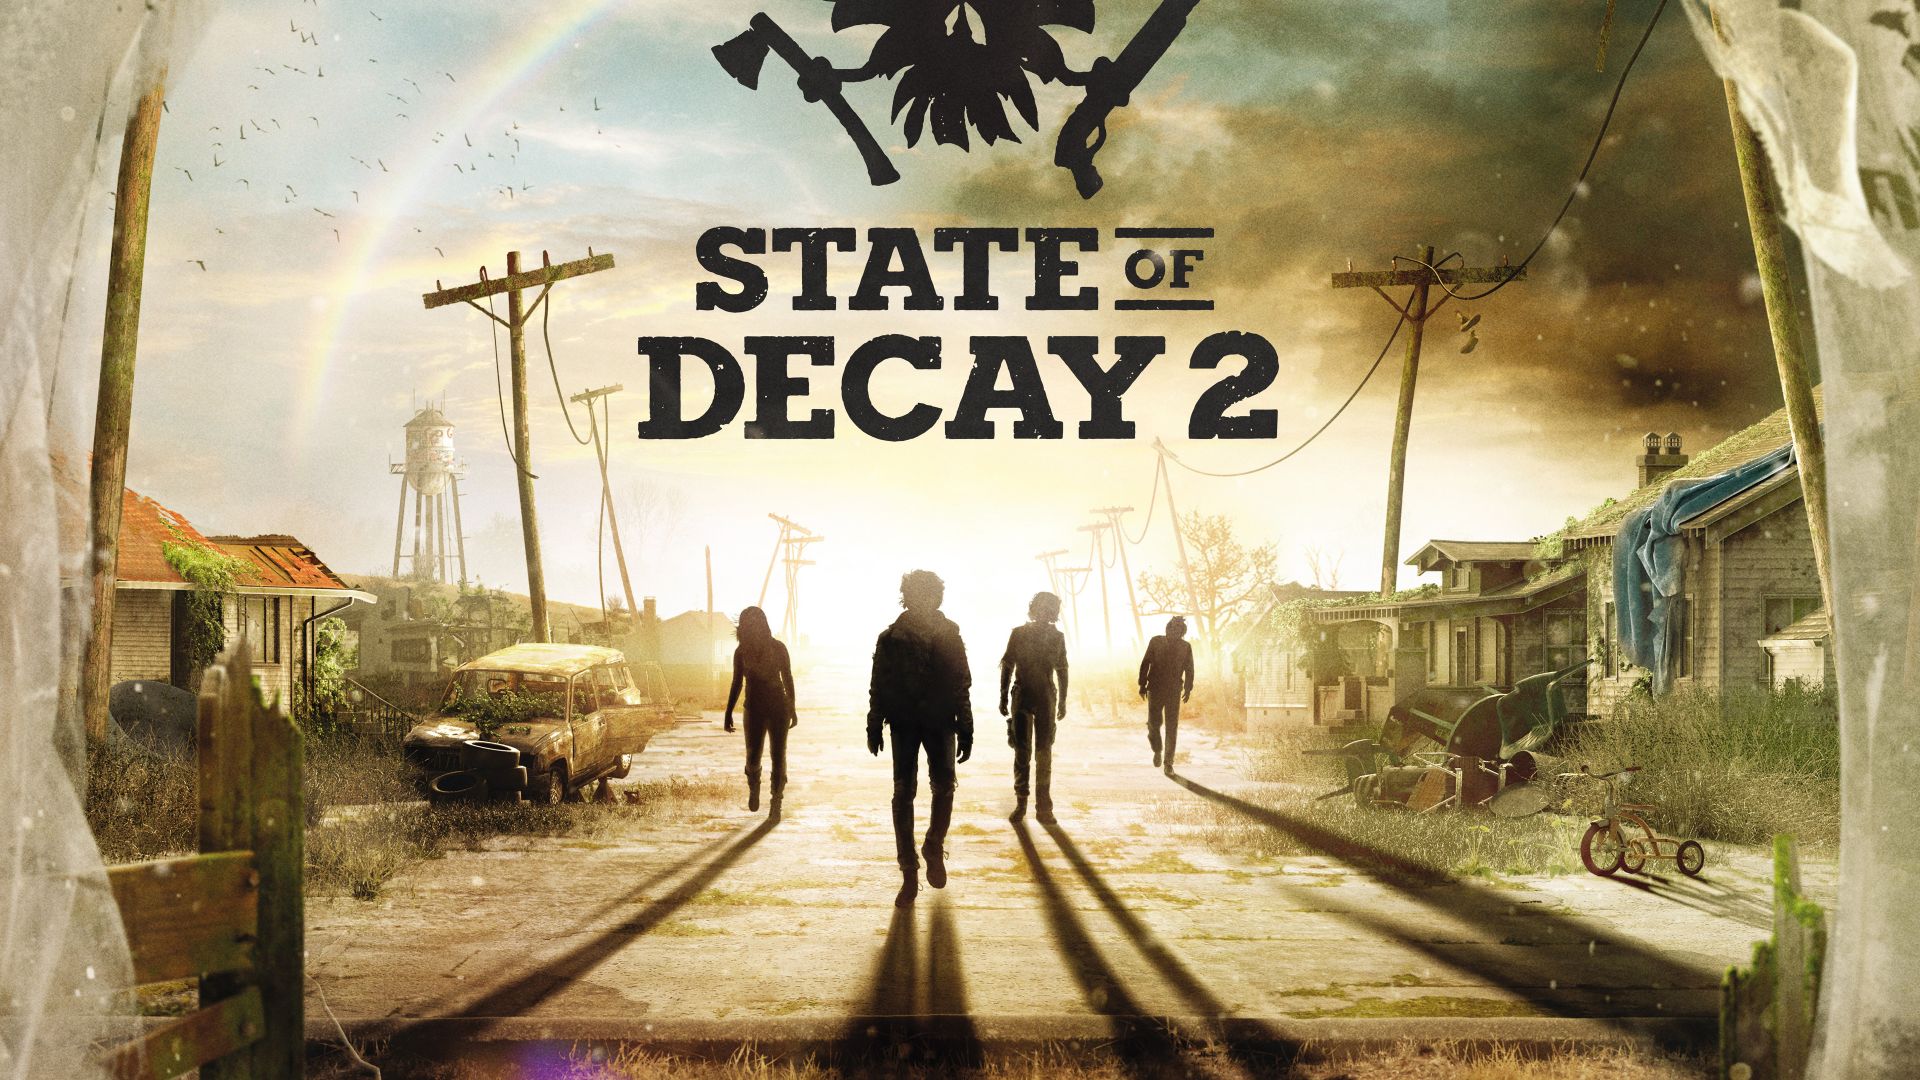 Wallpaper State of decay 2, E3 2017, video game, 4k